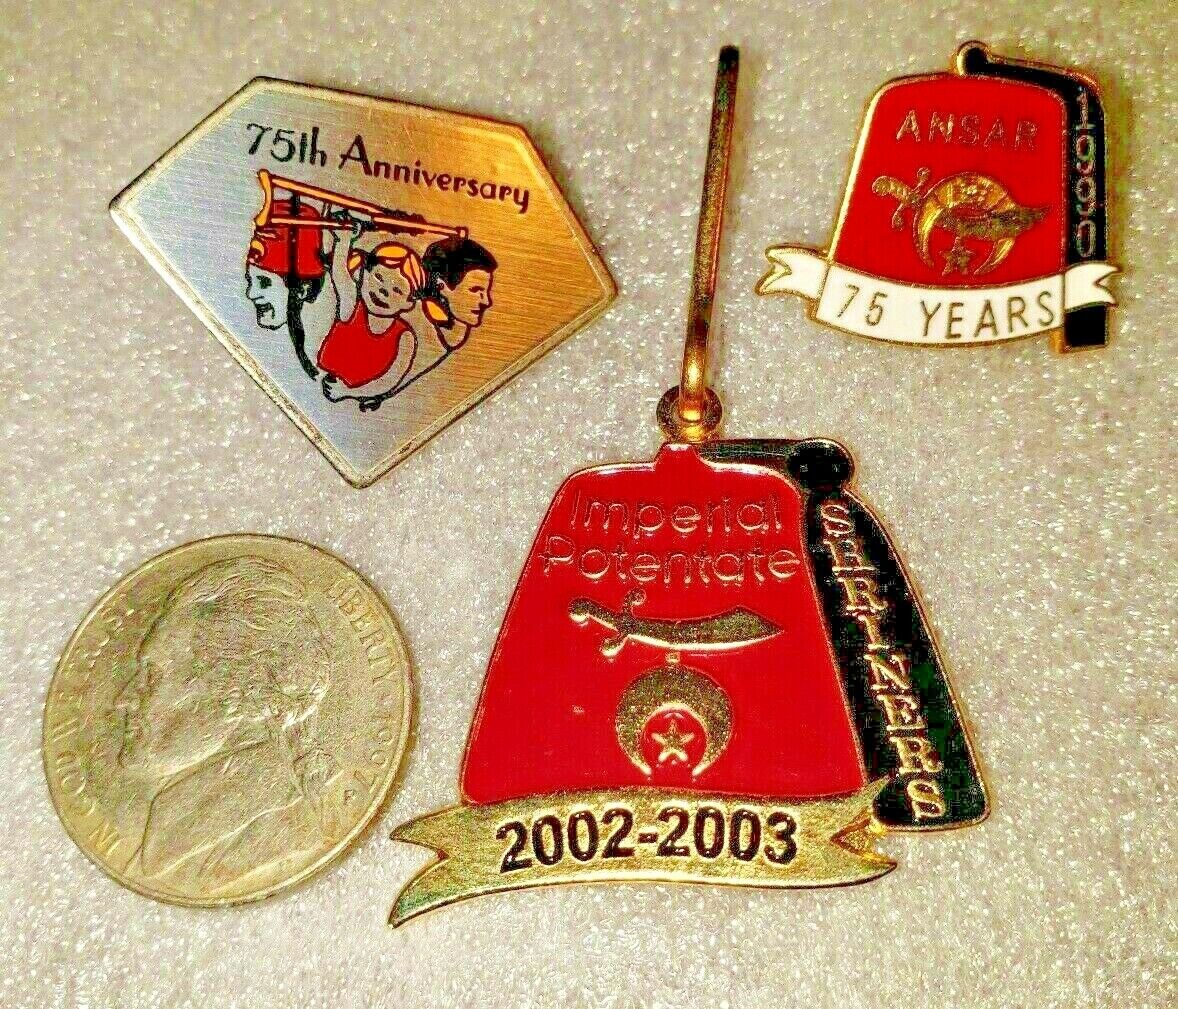 4 Piece Collectable Pins Ansar 75th Anniversary Shriners USA Clip Mix Lot Lapel